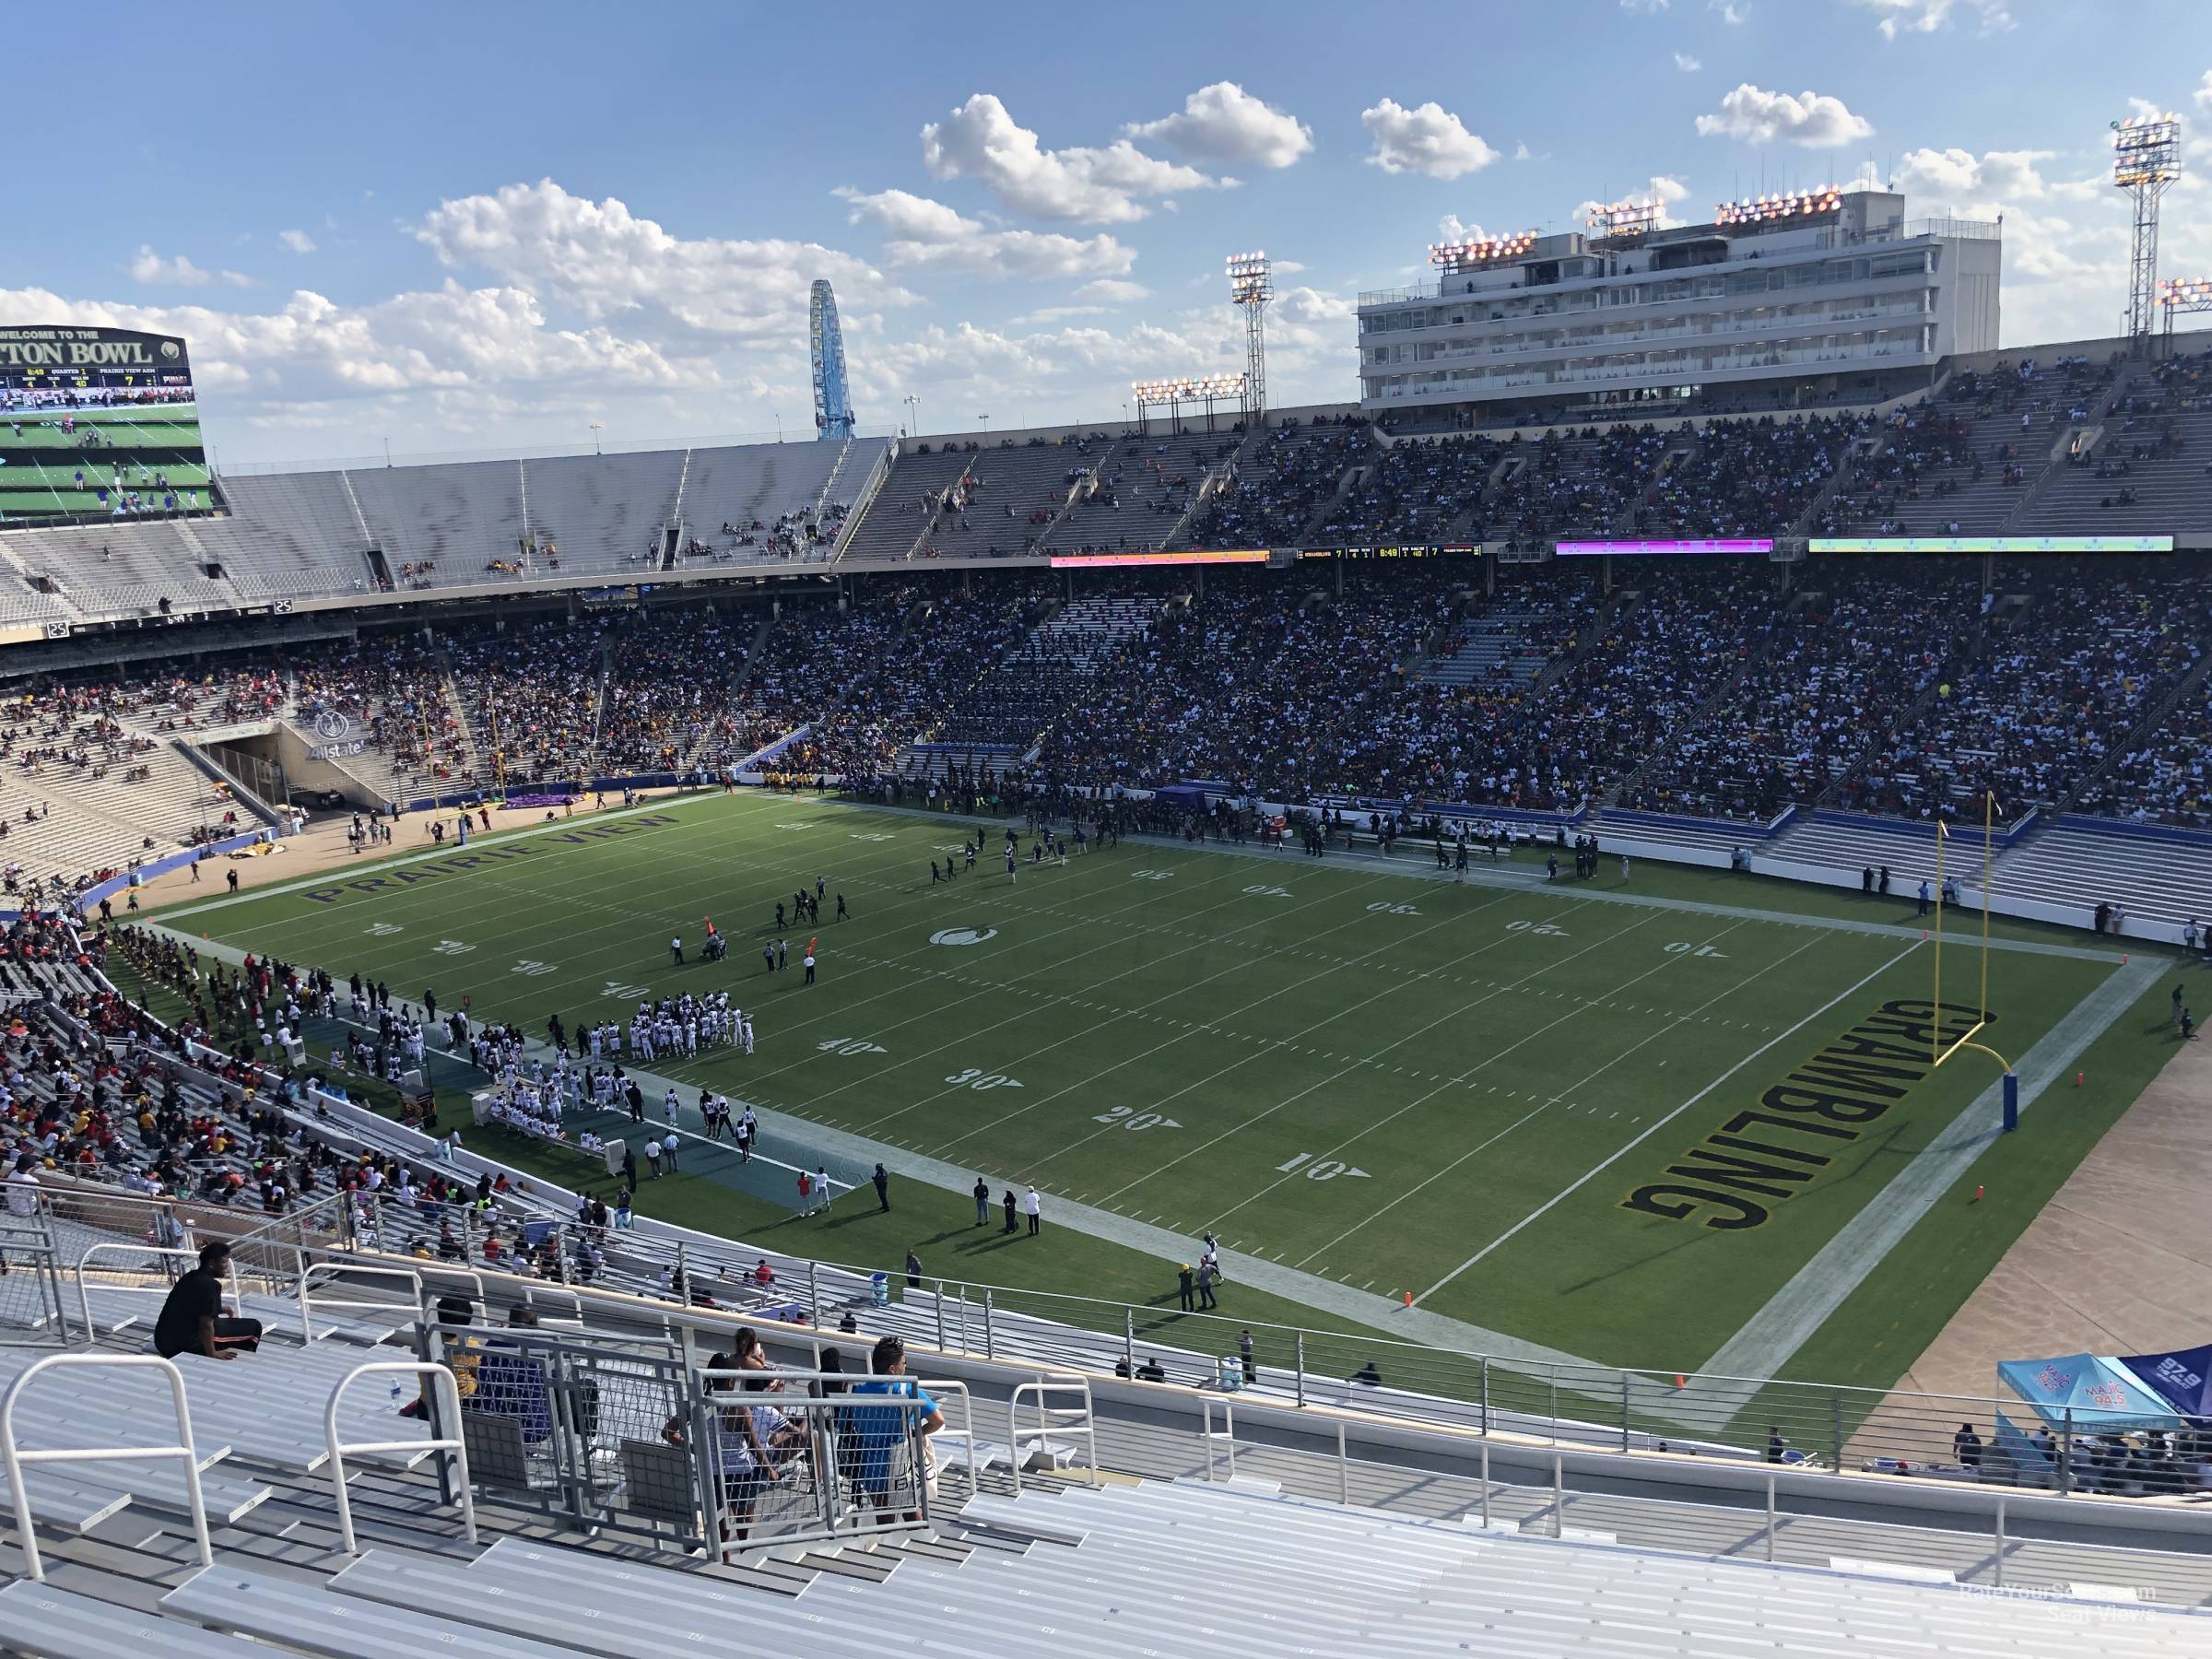 section 122, row 22 seat view  - cotton bowl